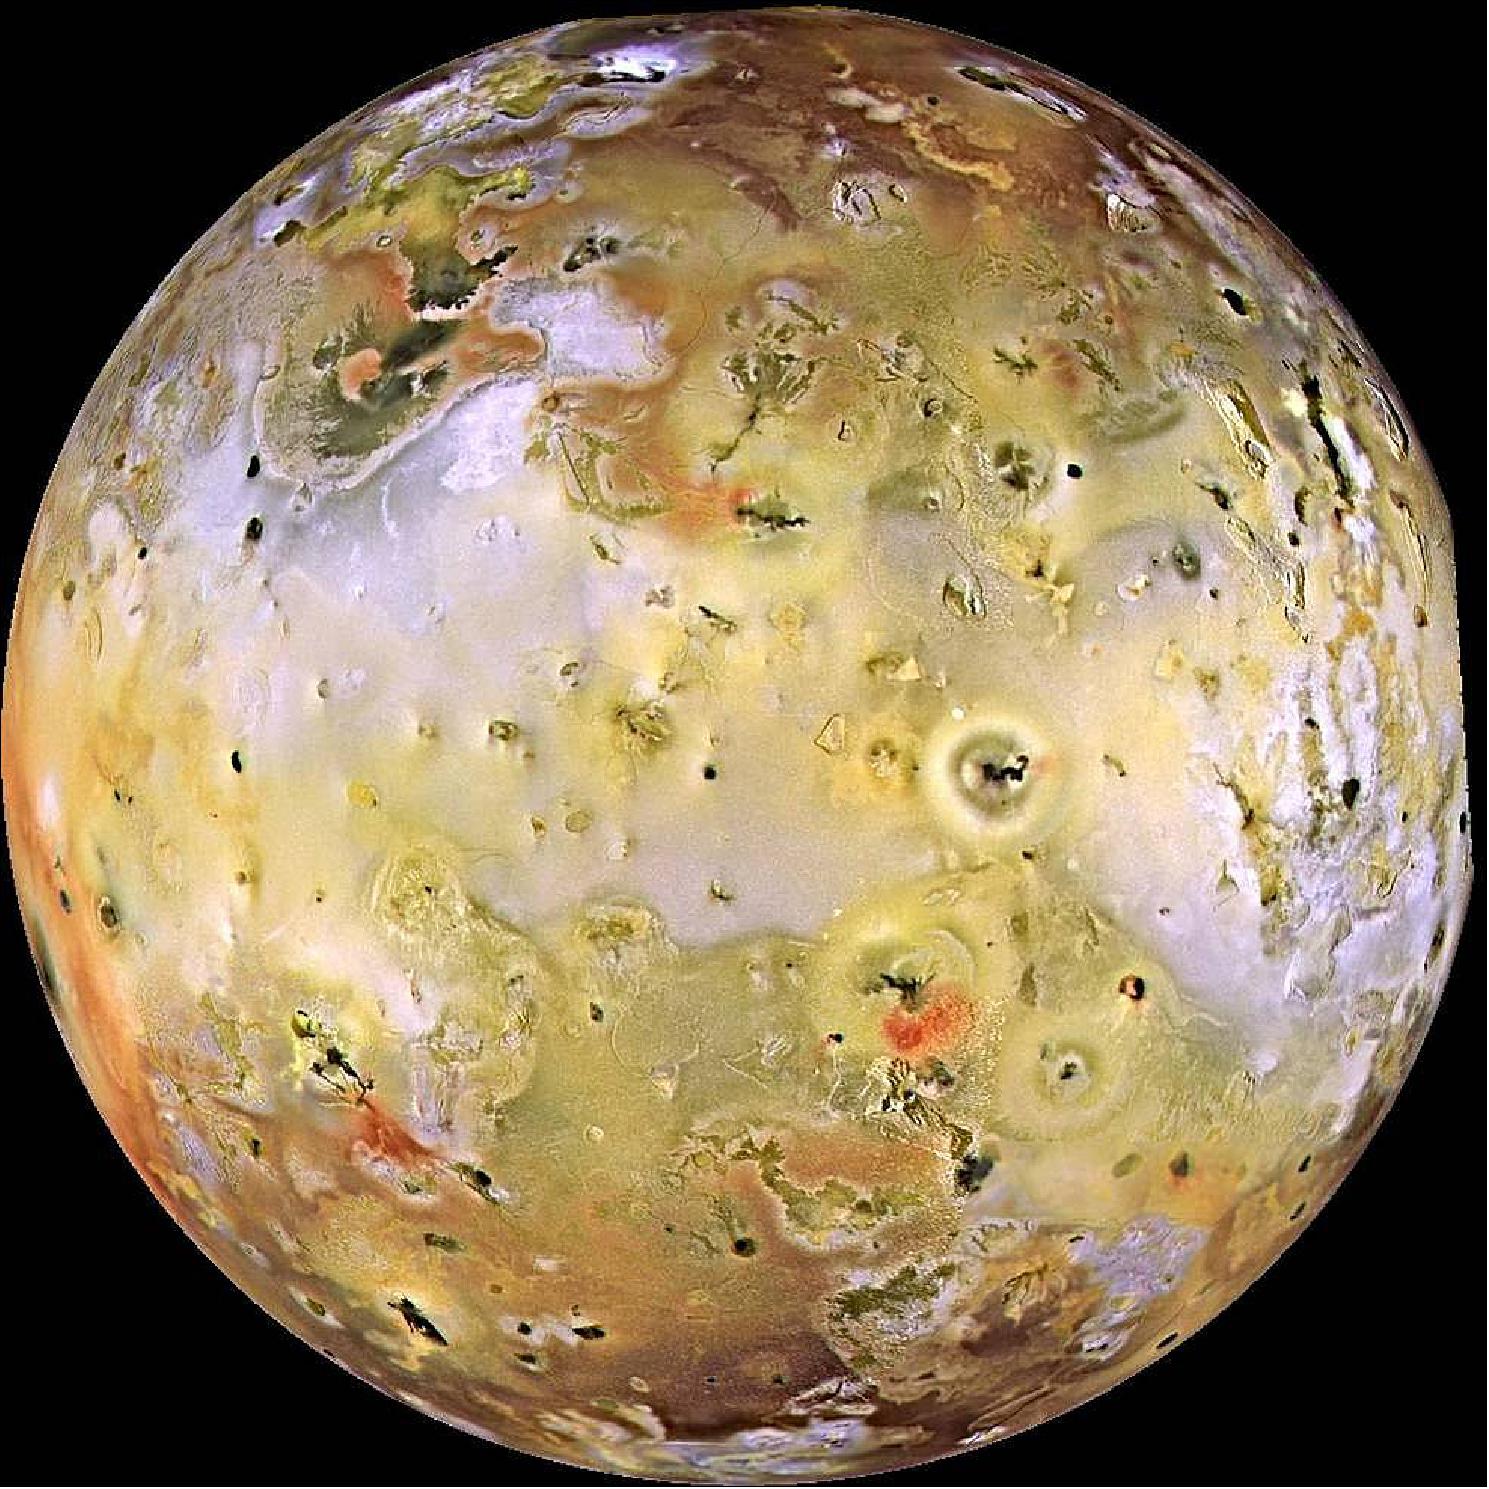 Figure 19: Jupiter's moon Io, the most volcanic body in the solar system, is seen in this 1997 image taken by NASA's Galileo spacecraft (image credit: NASA/JPL/University of Arizona)